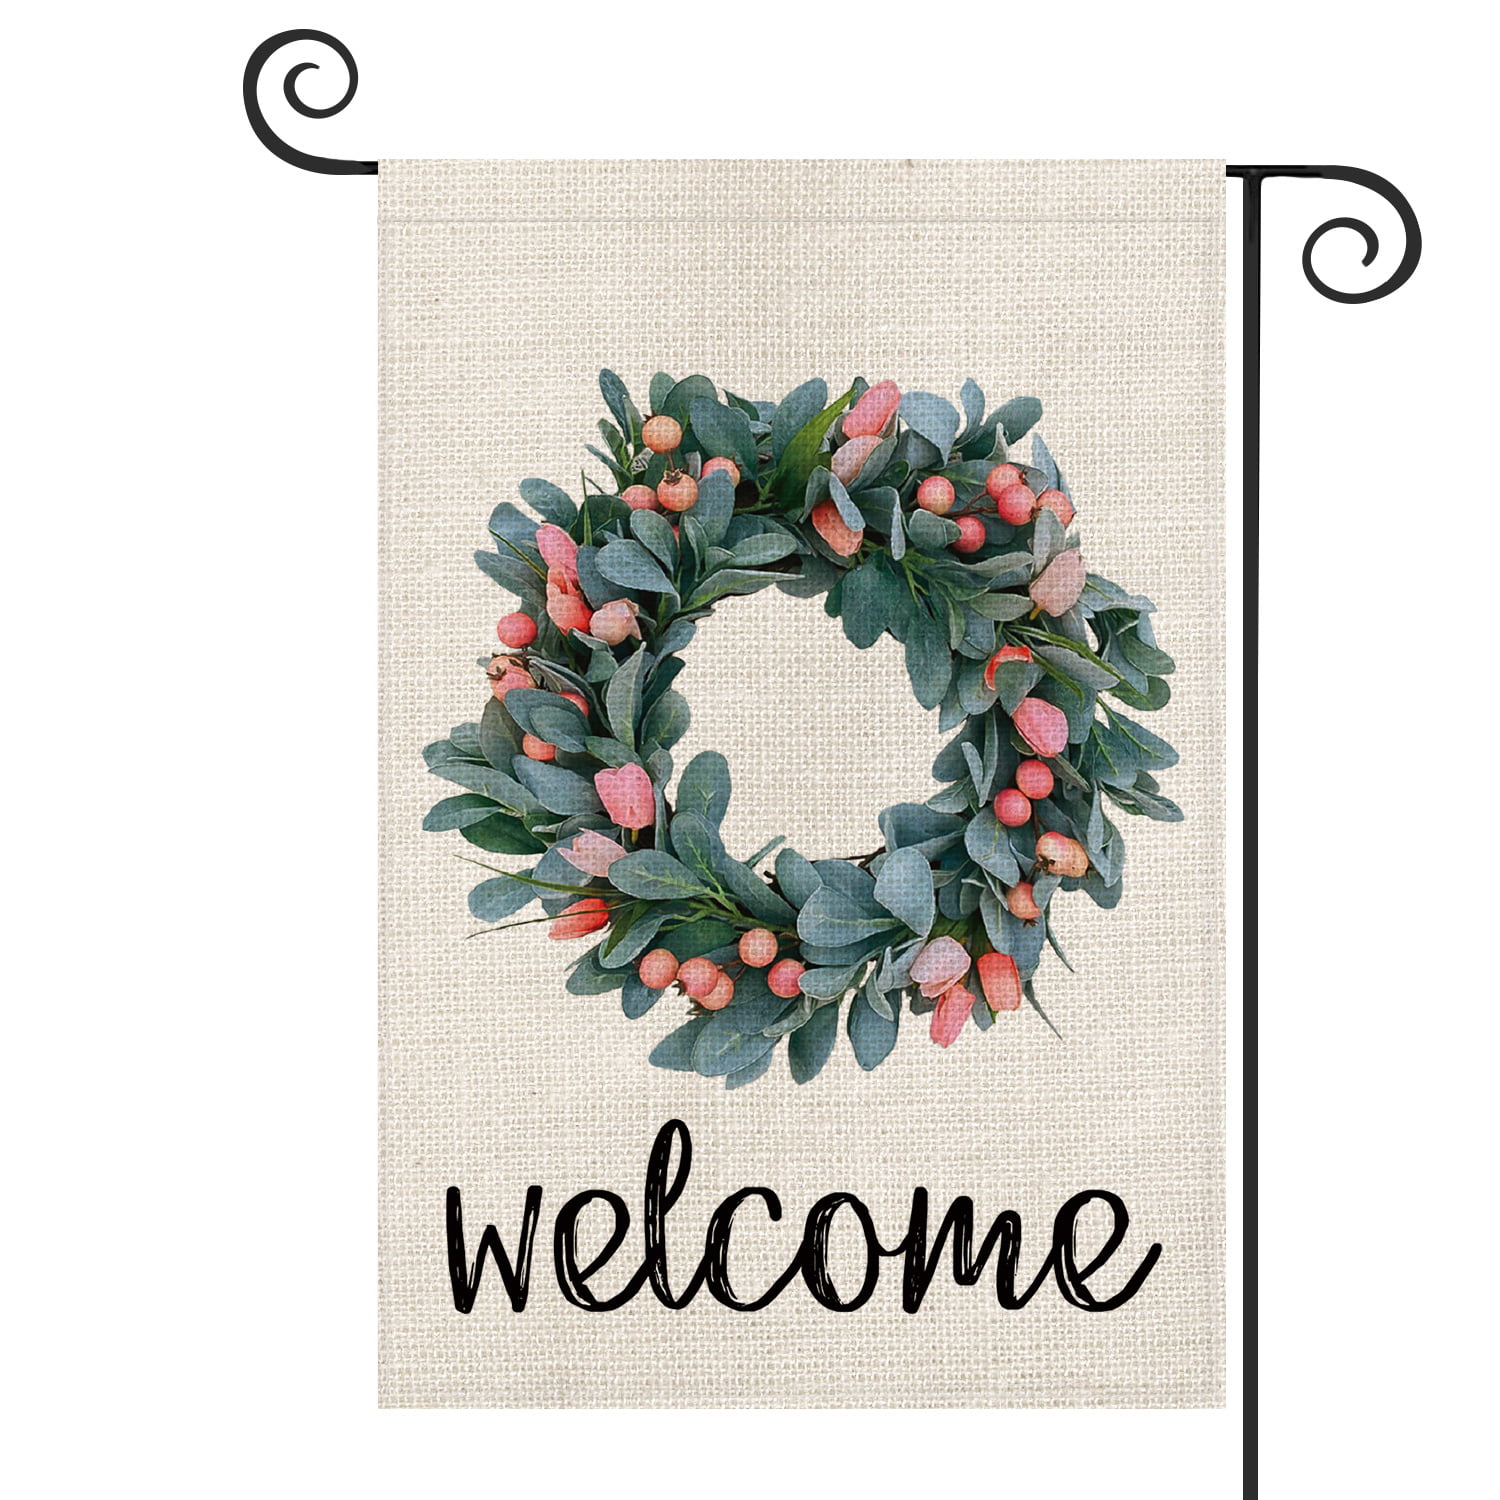 Spring Summer Flag Yard Outdoor Decoration 12.5 x 18 Inch AVOIN Welcome Spring Lamb's Ear Wreath with Pink Tulips and Berries Garden Flag Vertical Double Sided